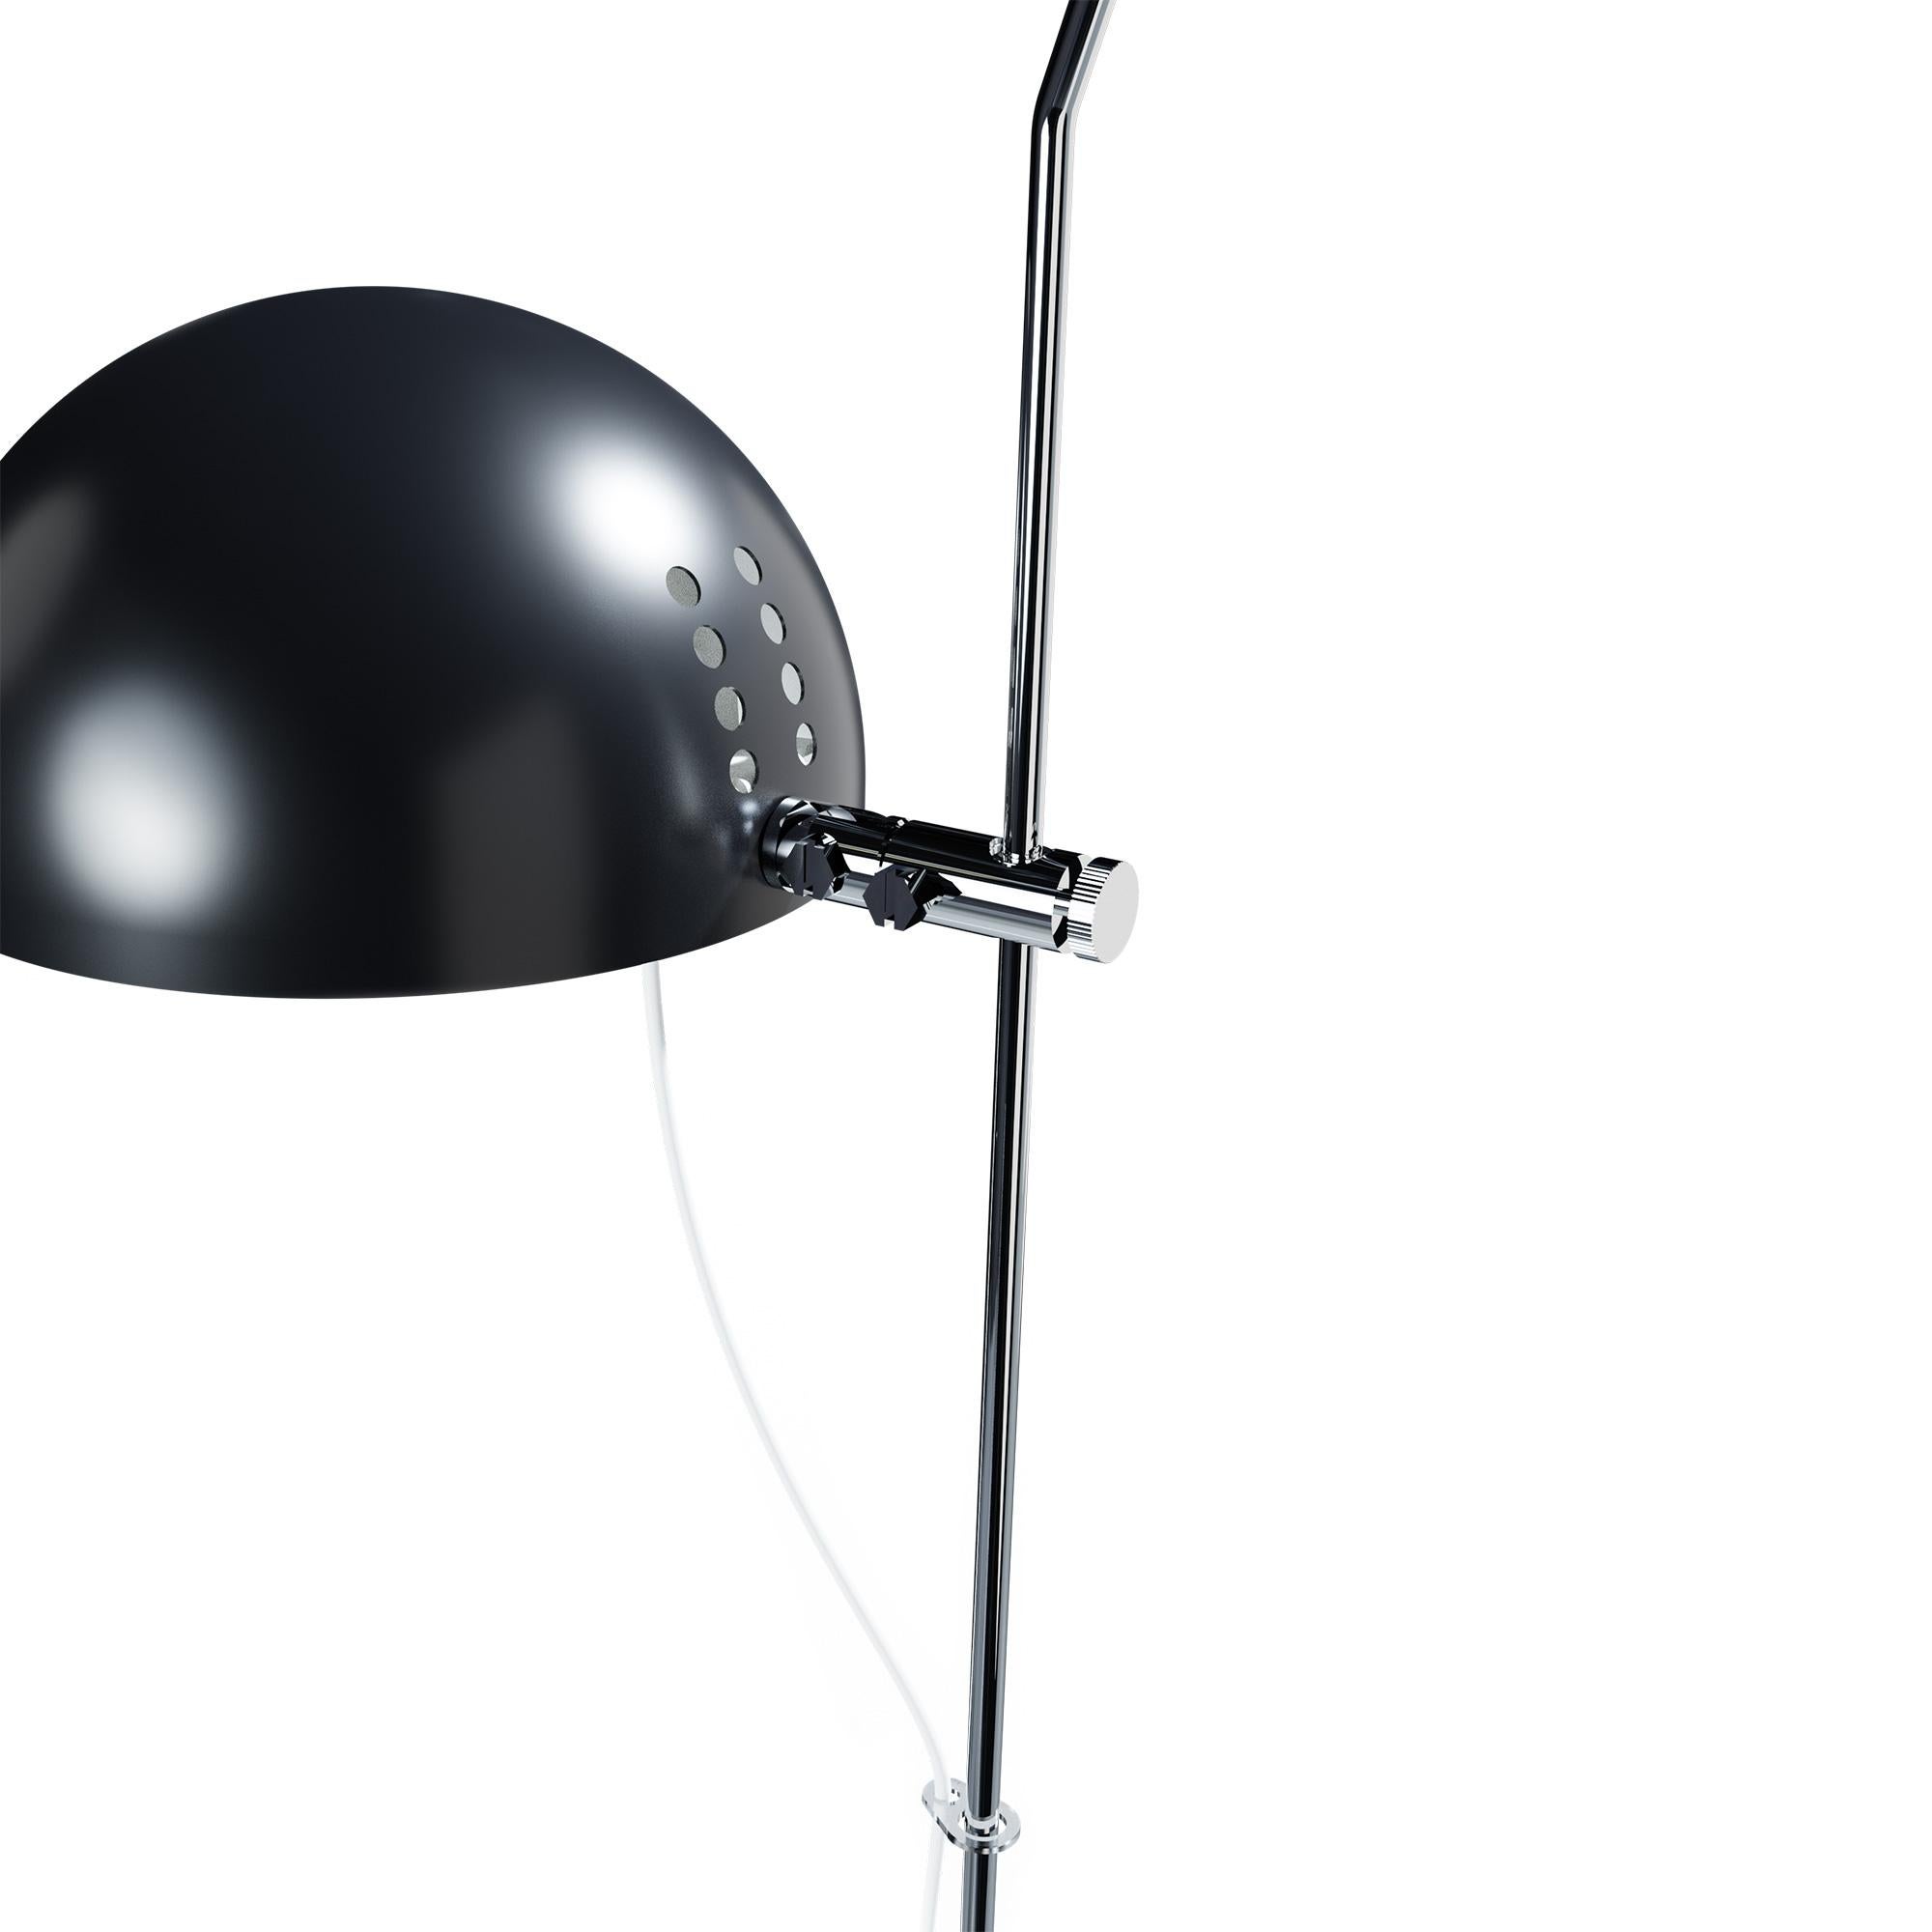 Alain Richard 'A21' Desk Lamp in Black for Disderot.

Executed in black painted metal, this newly produced numbered edition with included certificate of authenticity is made in France by Disderot with many of the same small-scale manufacturing